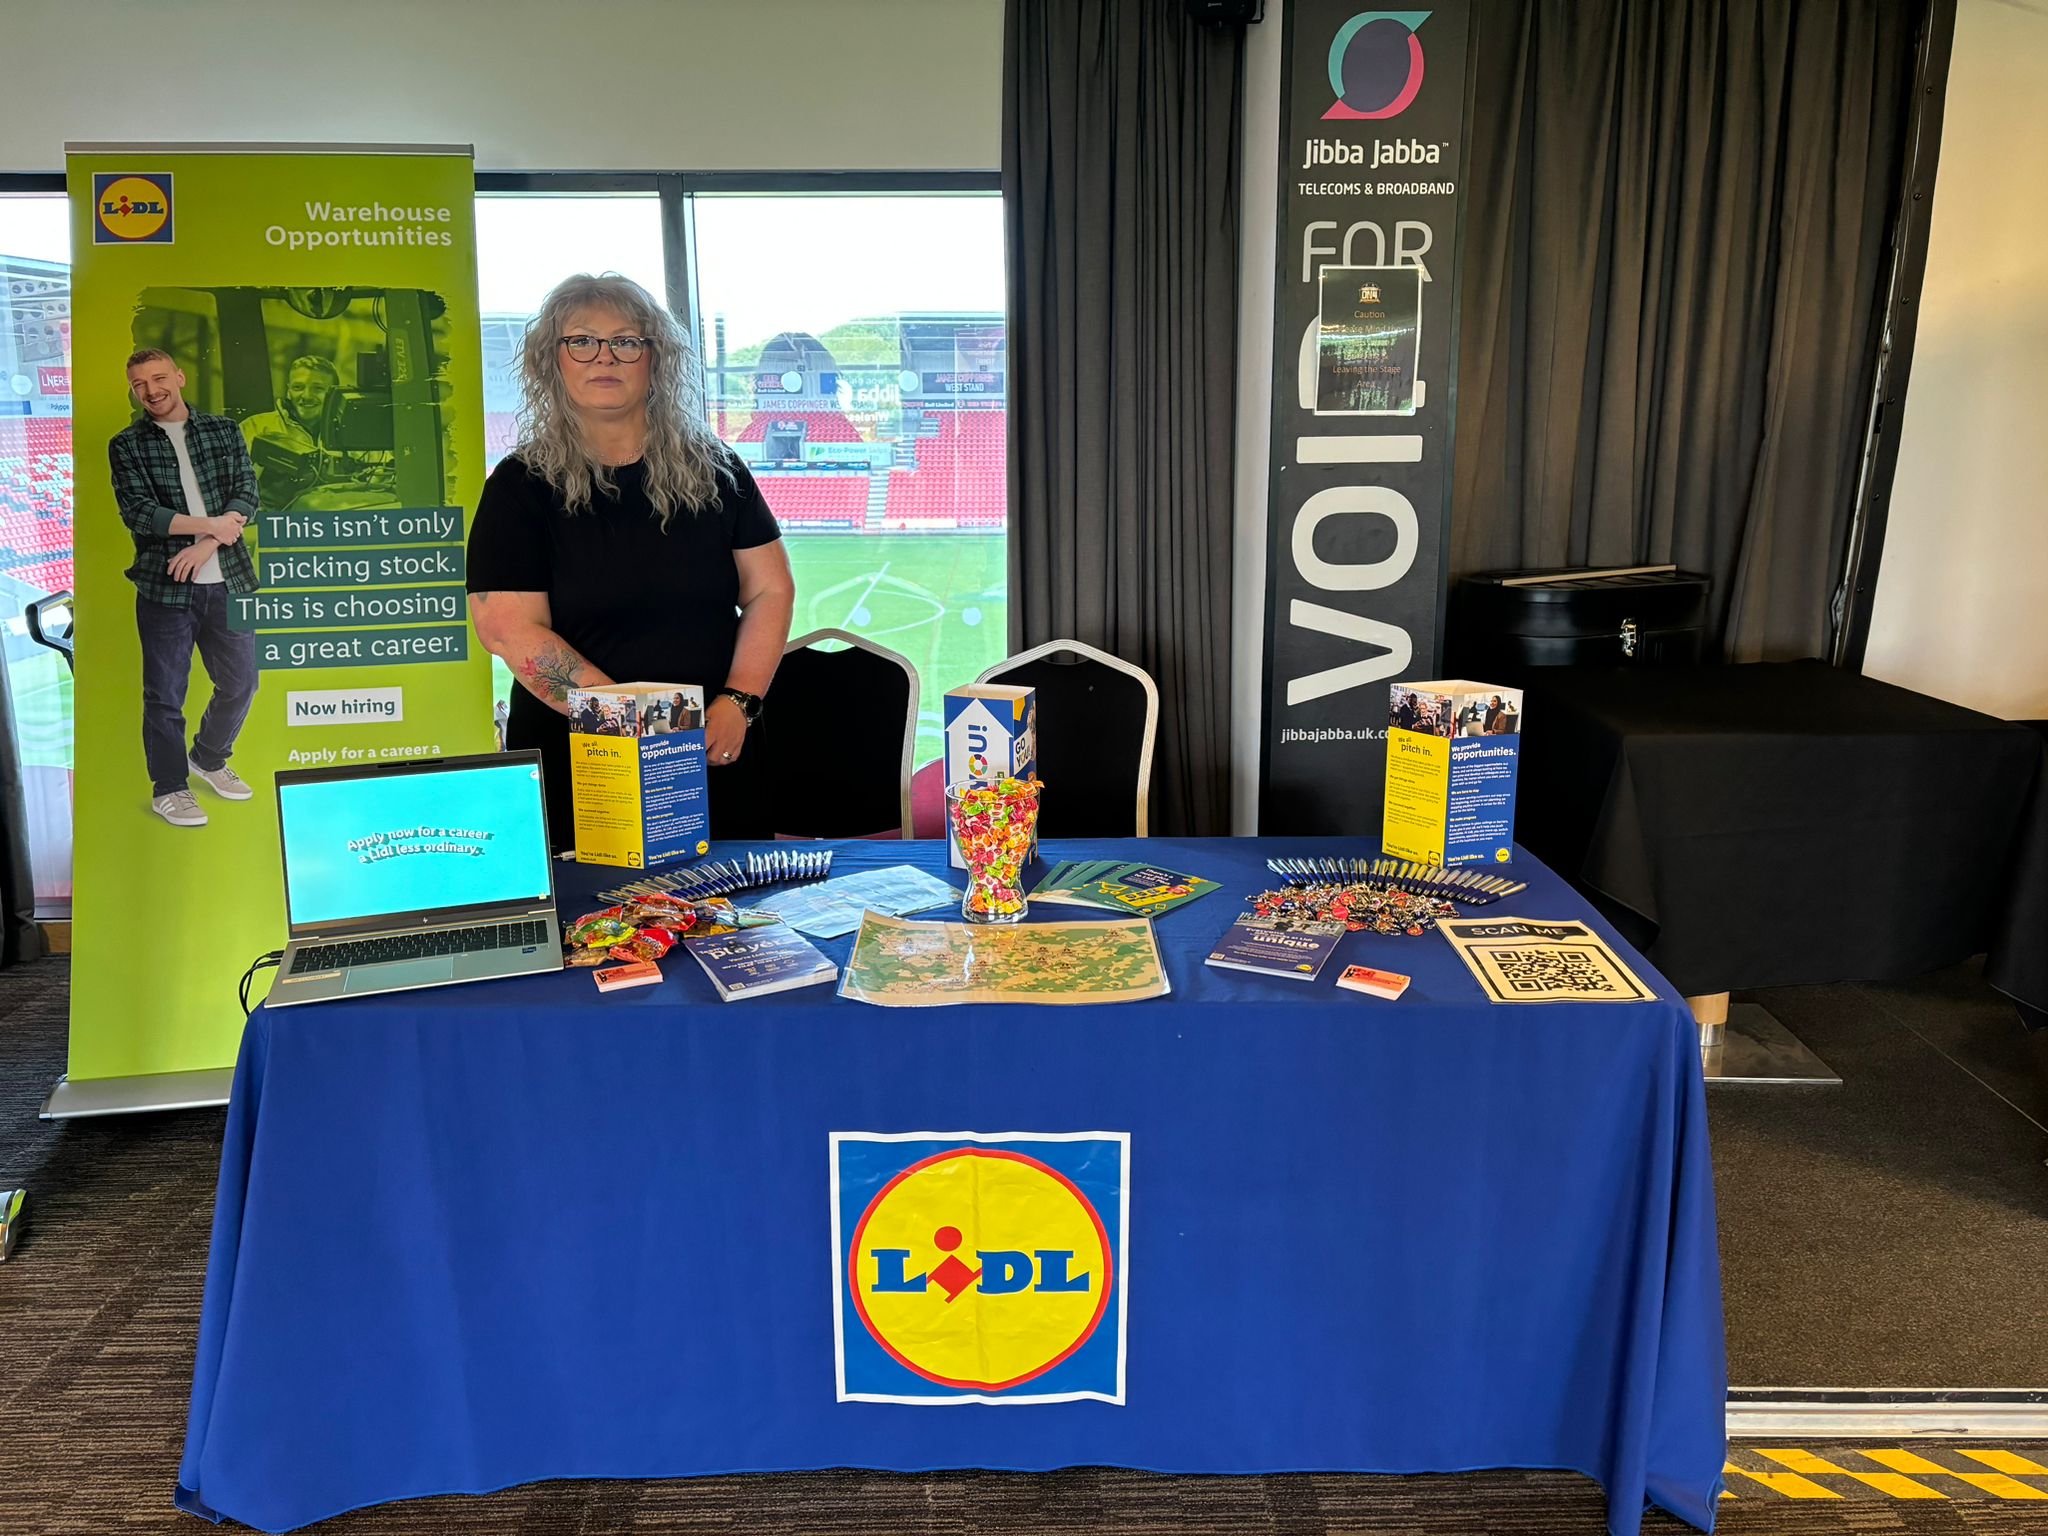 Lidl at our event in Doncaster